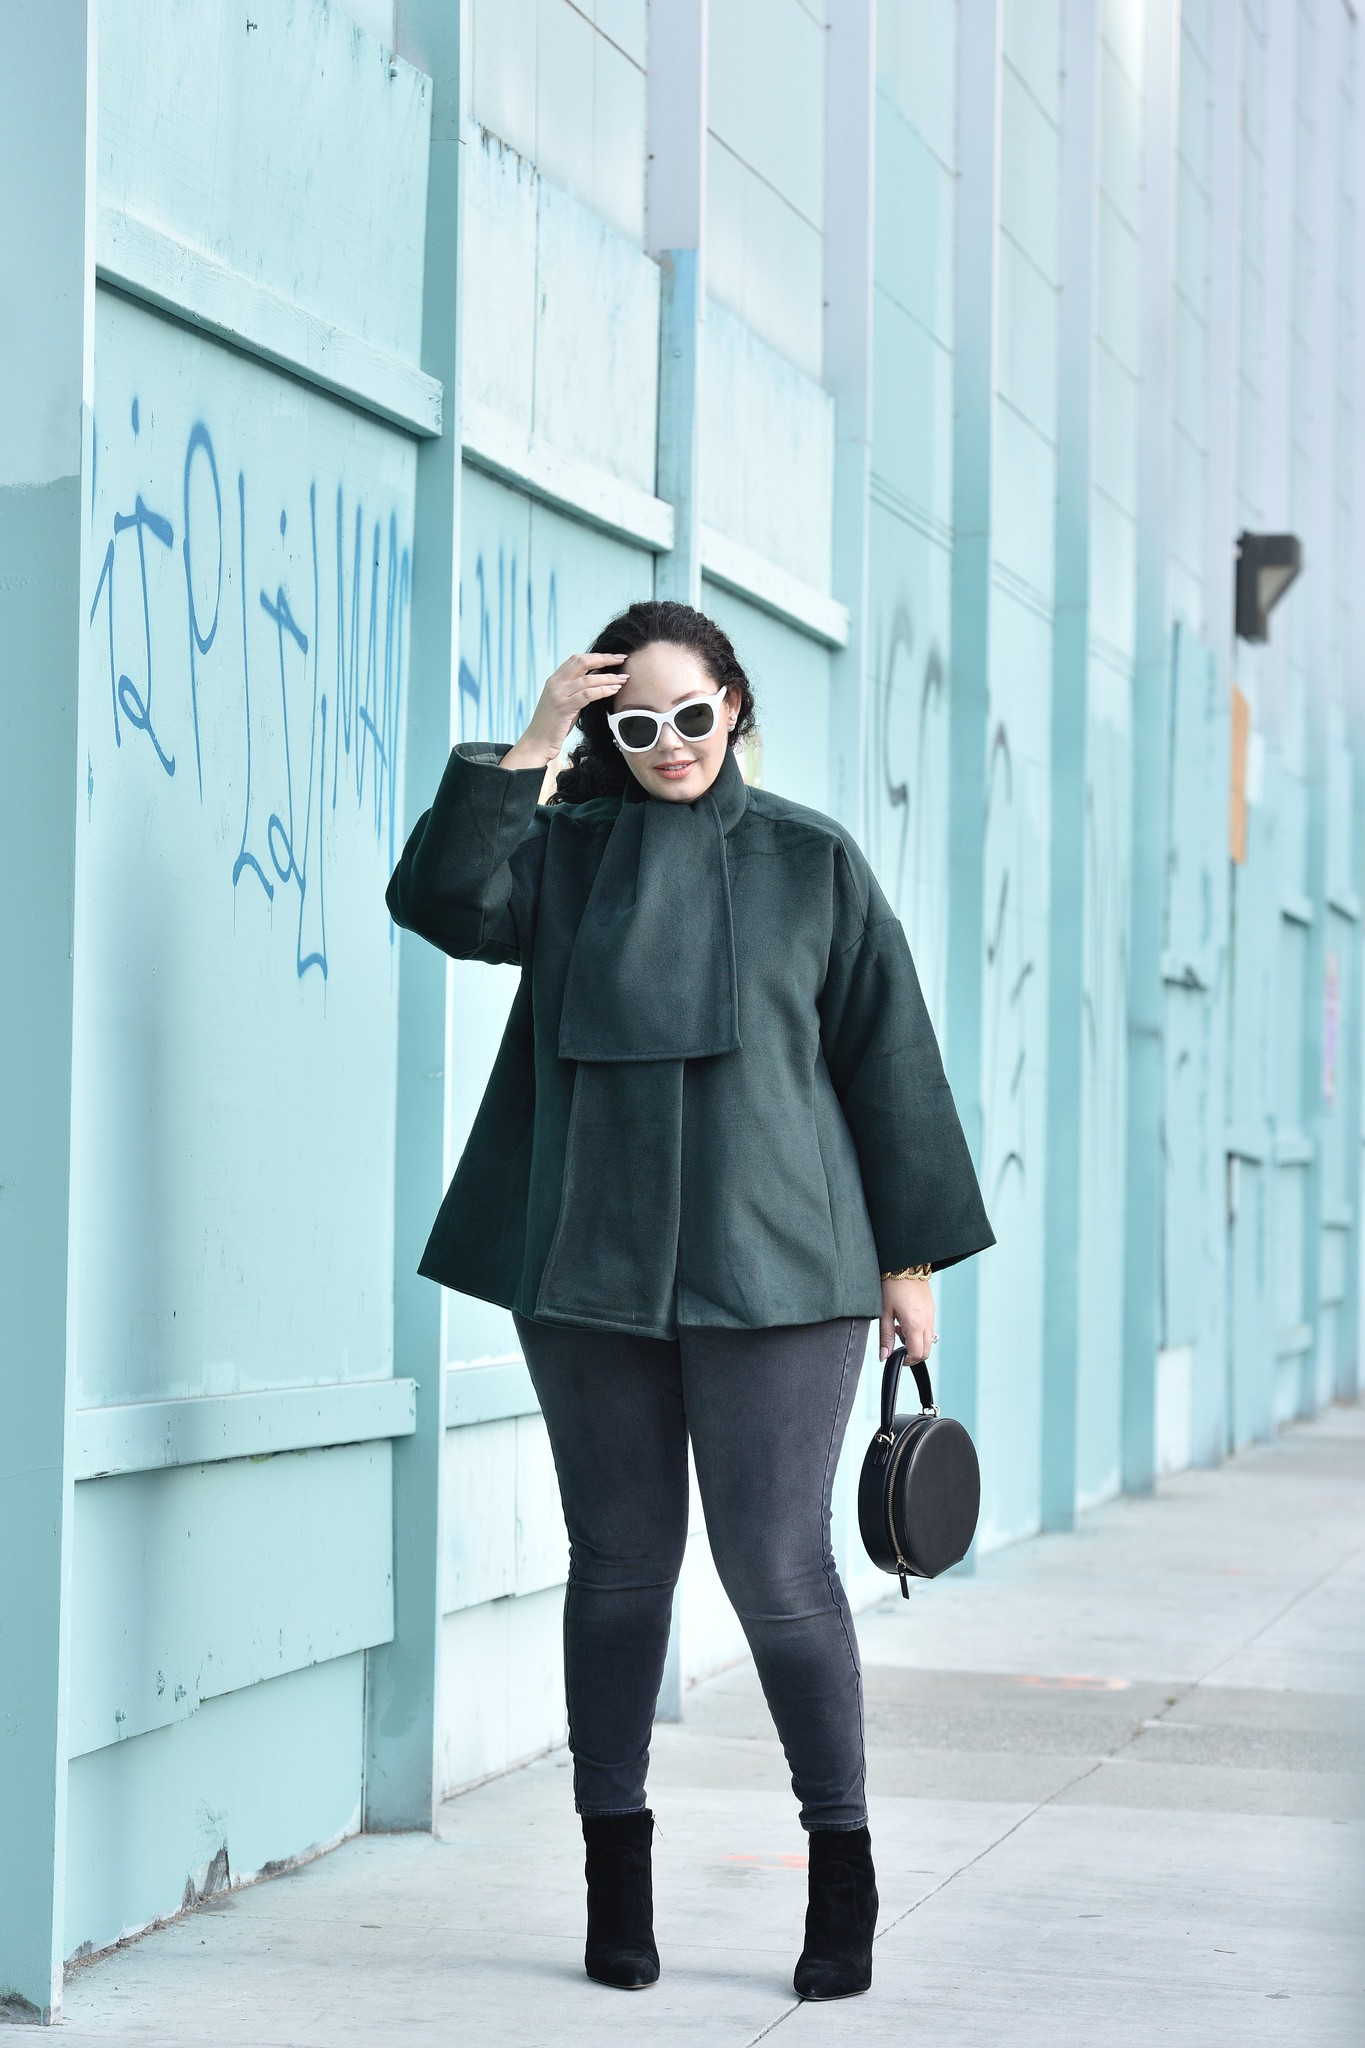 This Statement Coat will be in my Closet Forever via Girl With Curves #plussizefashion #curvyoutfits #modcloth #curvyconfidence #bodypositive